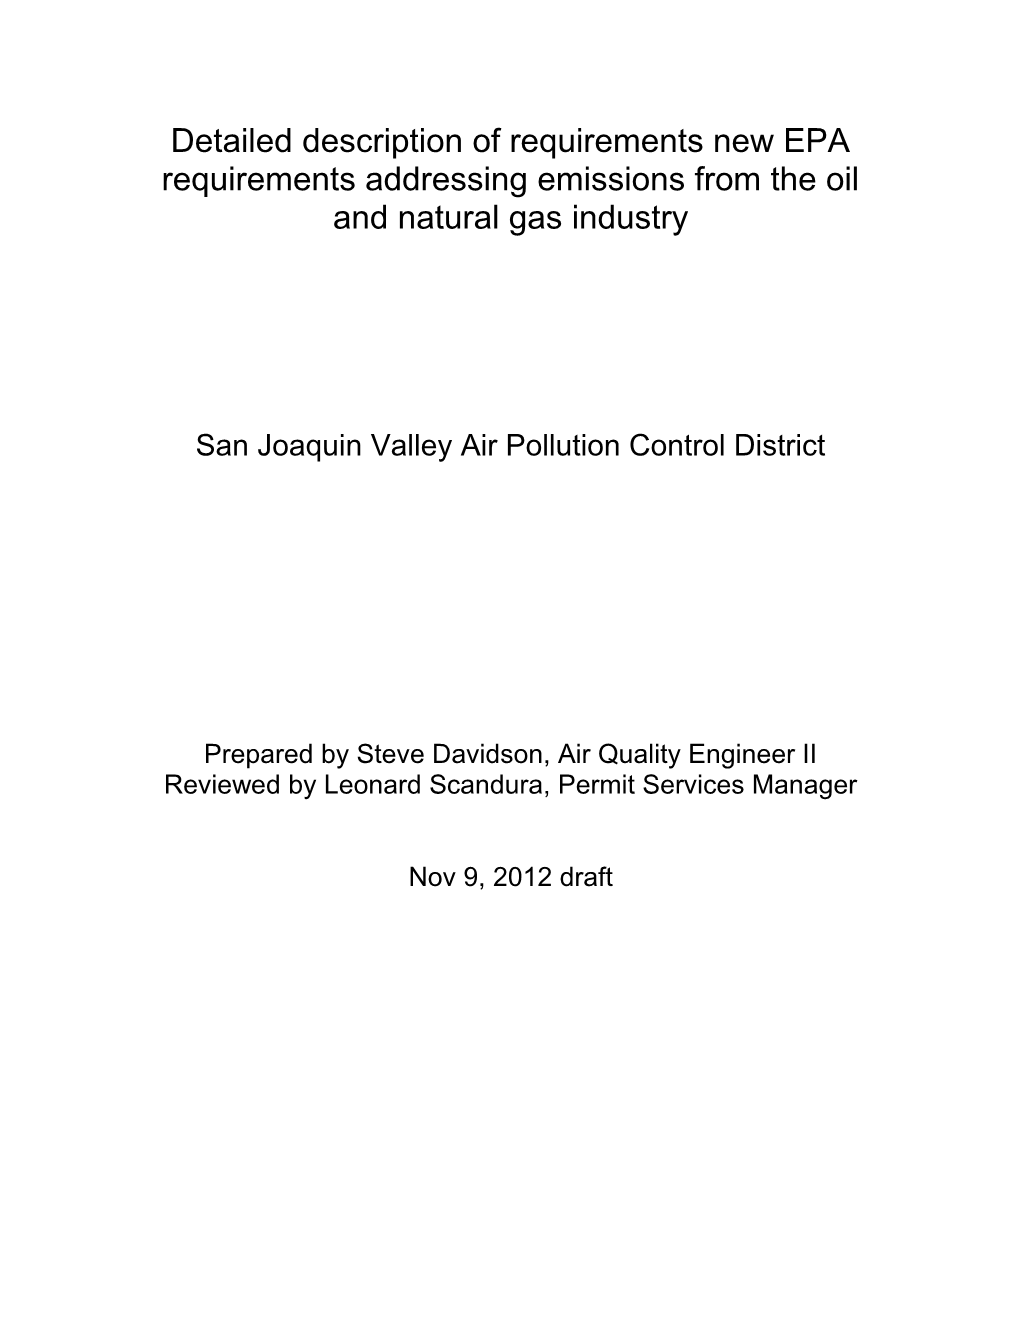 San Joaquin Valley Air Pollution Control District s1